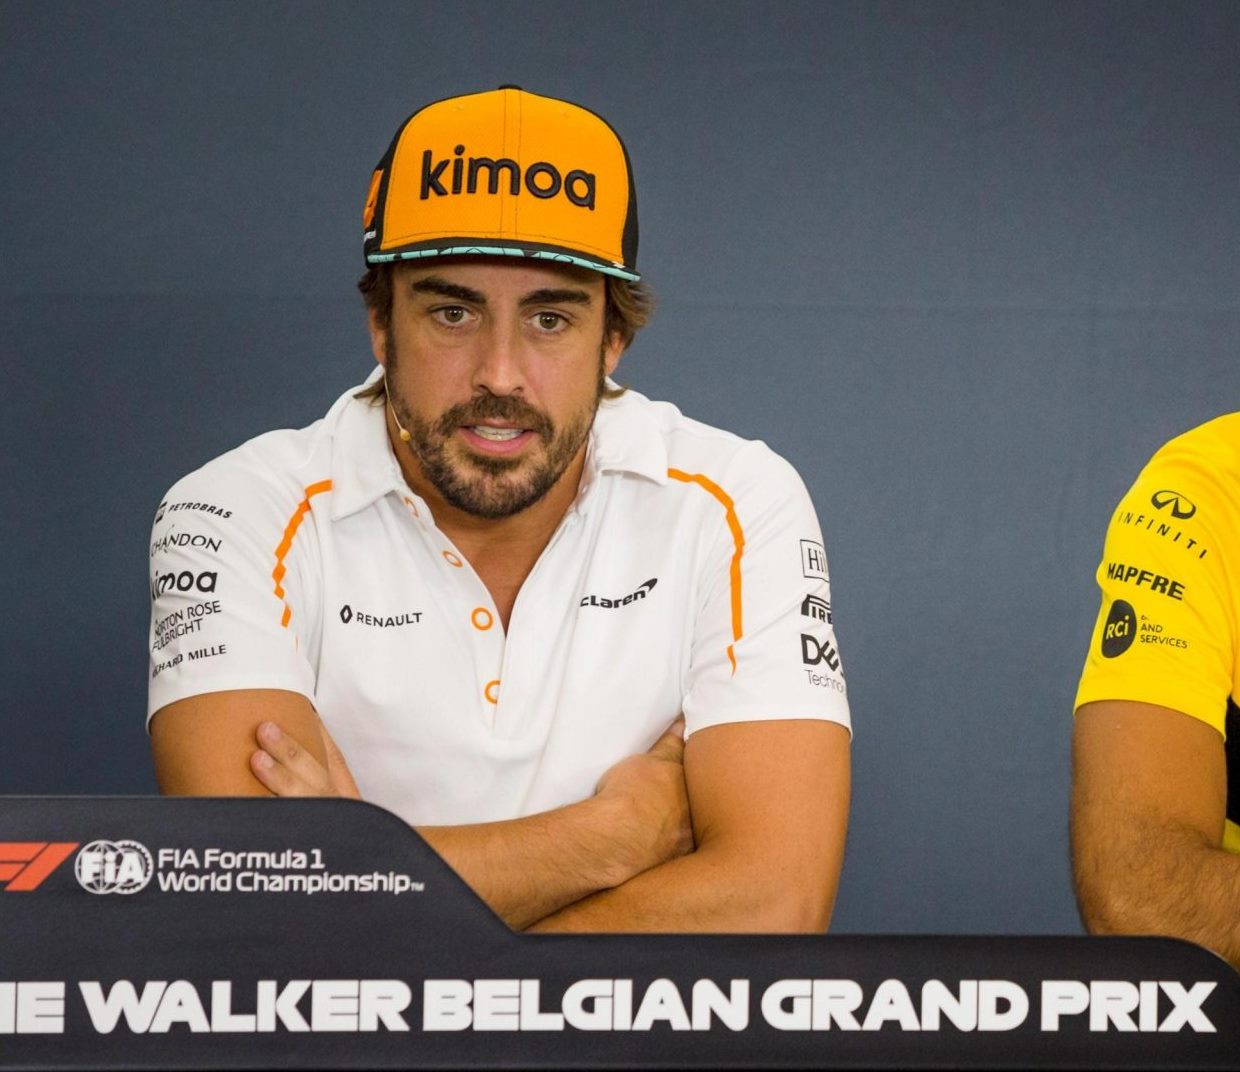 Alonso says all racing is dangerous